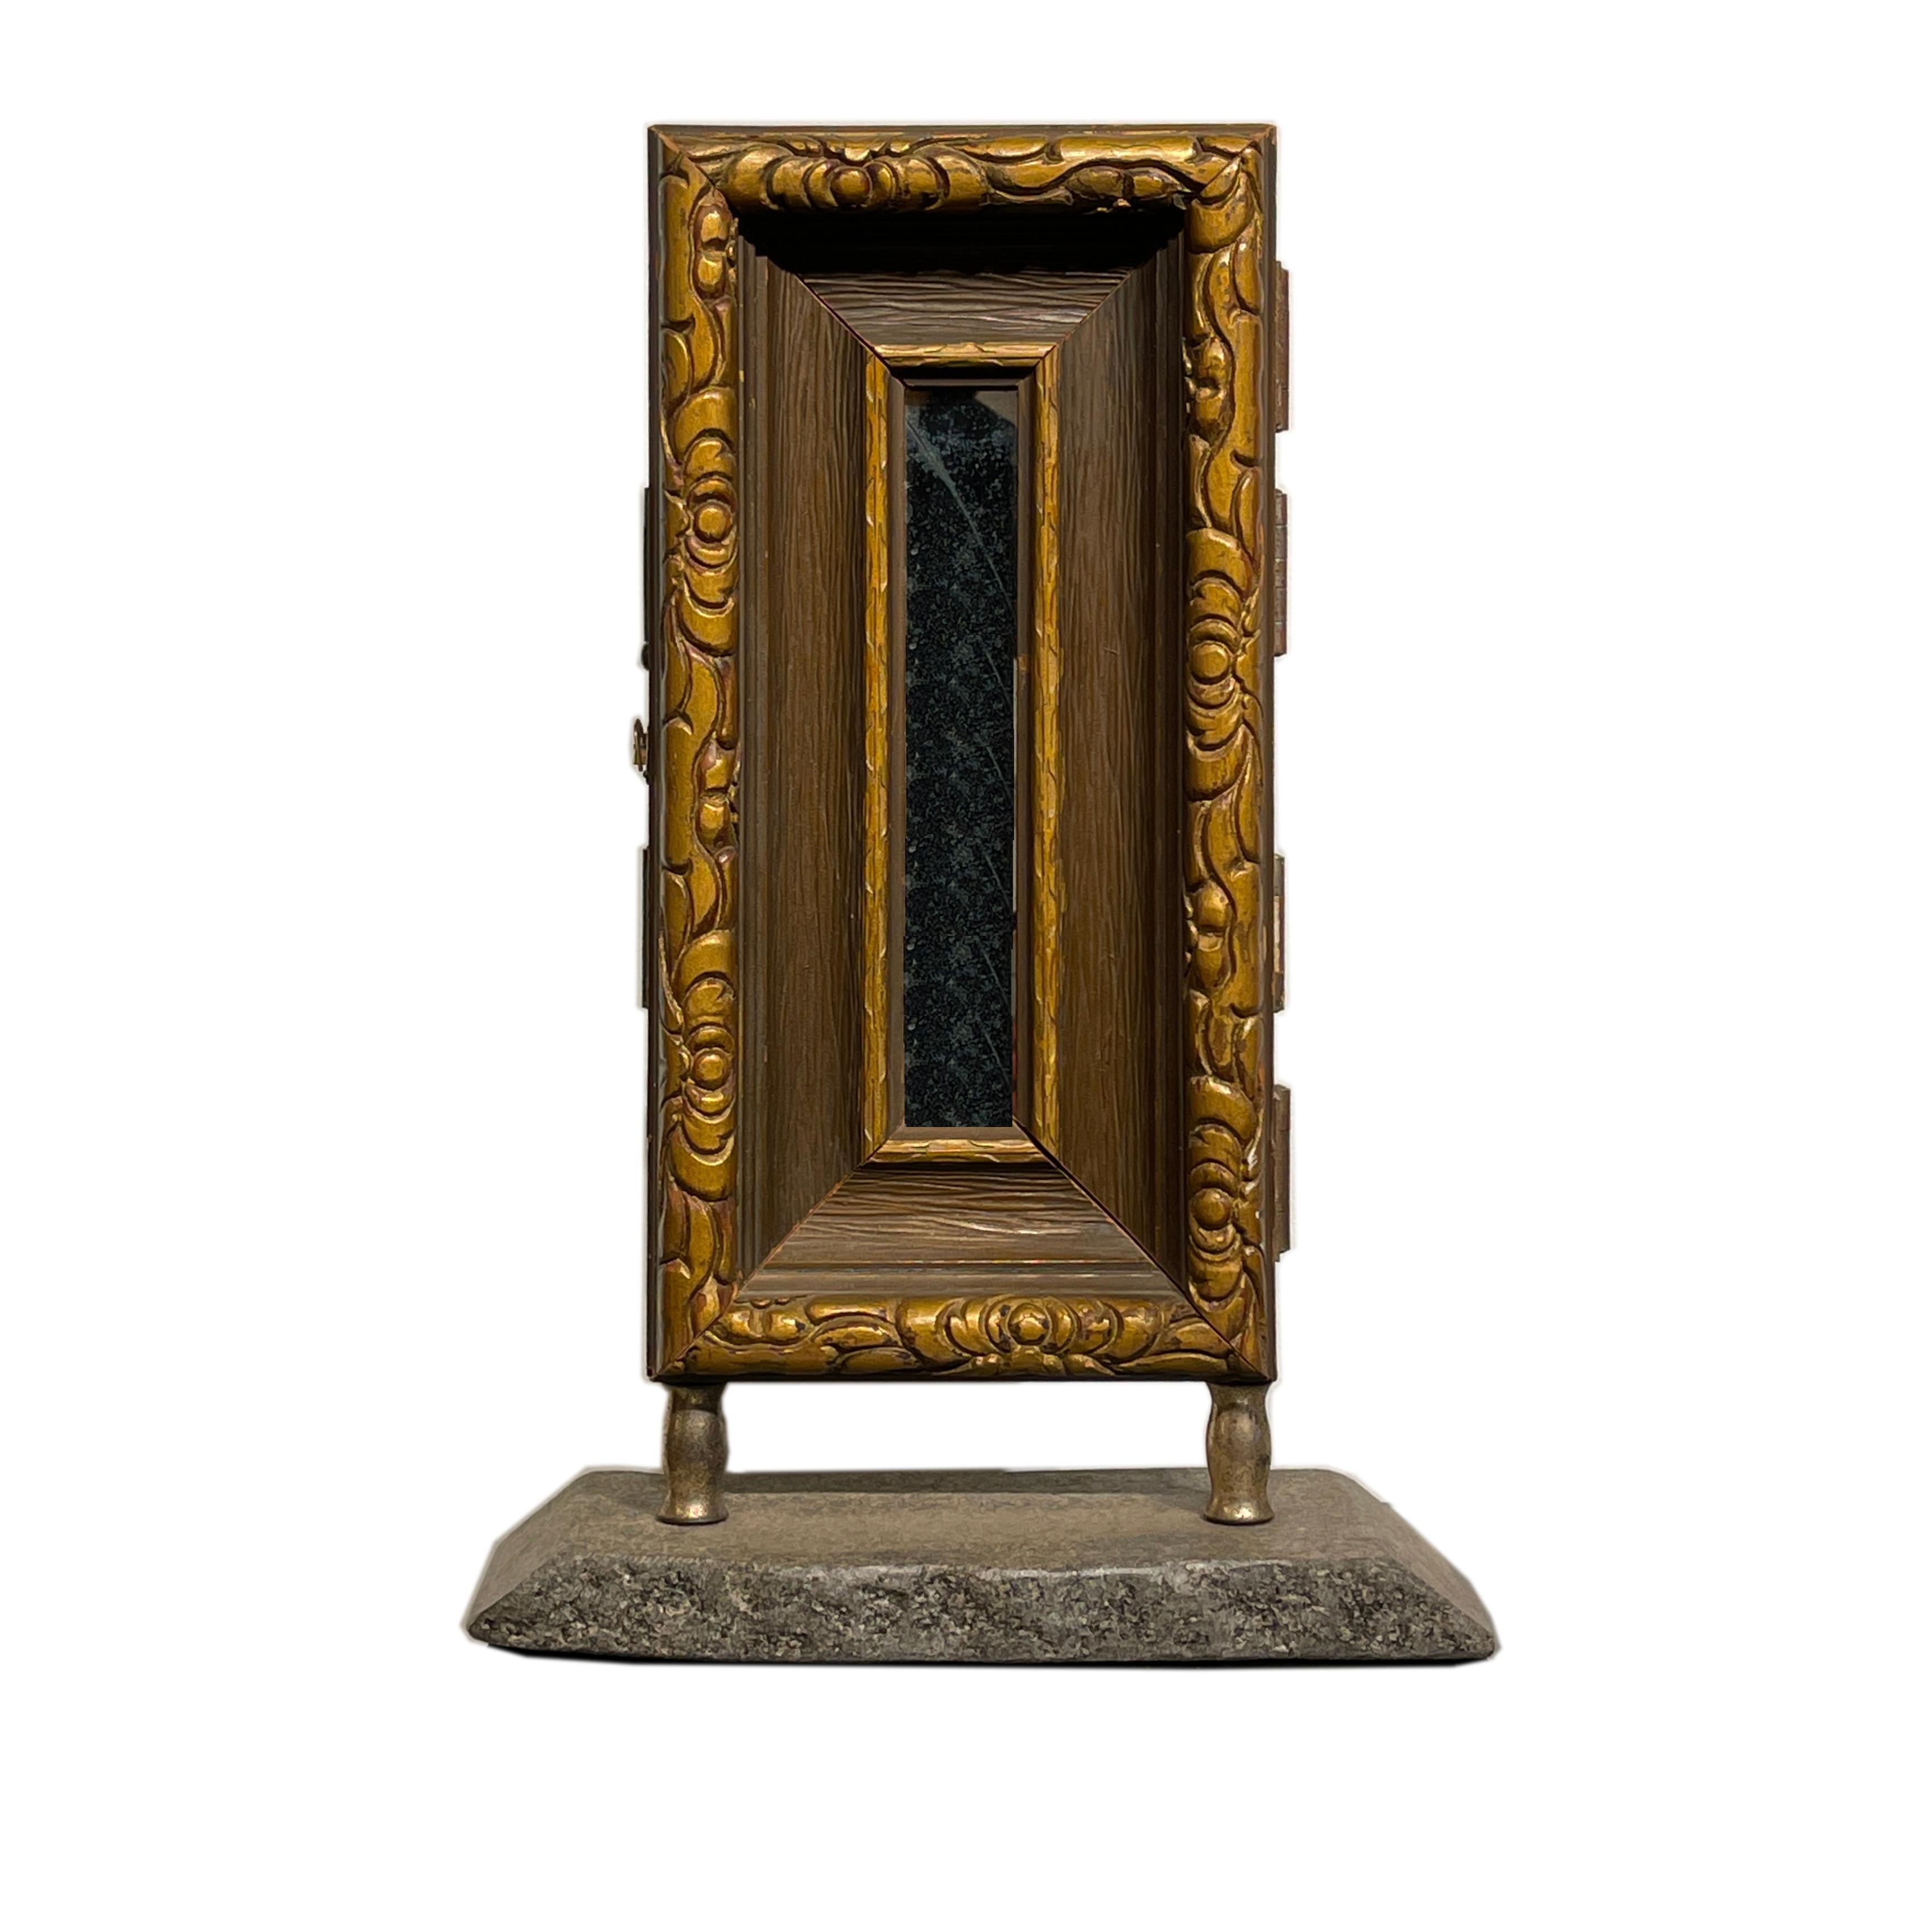 Reclaimed Wood Vanity Mirror Art Object with Paintings and Collages